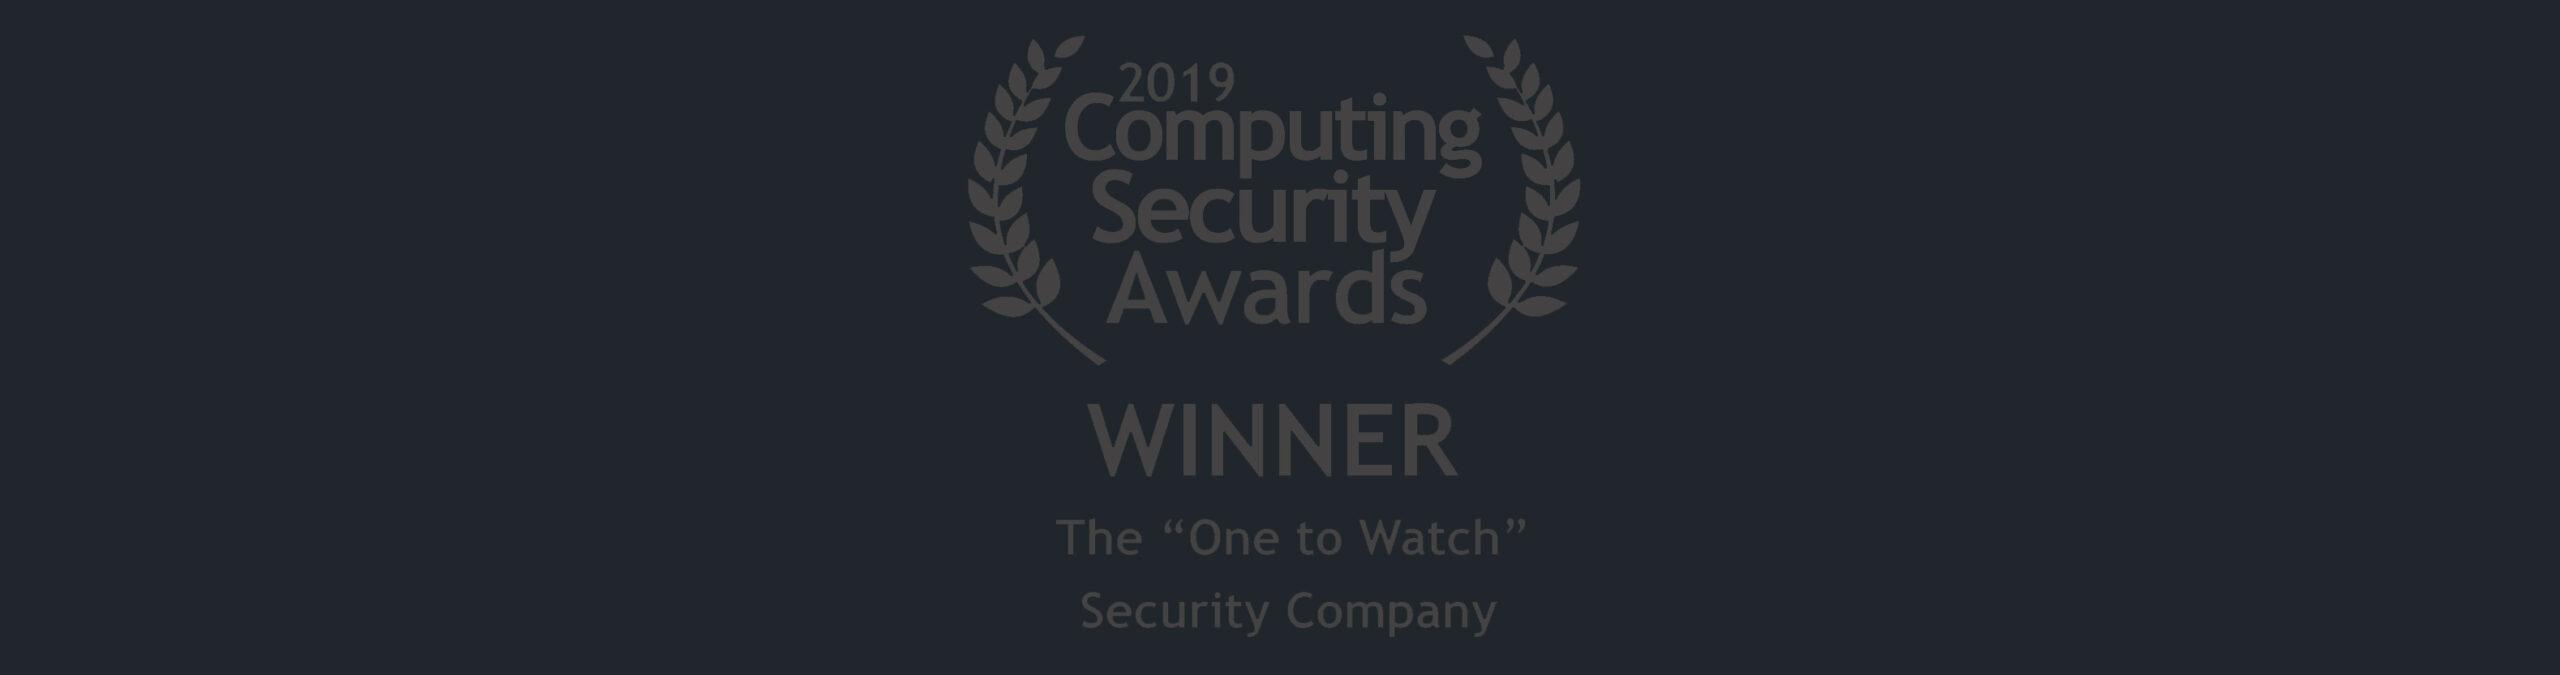 The One to Watch Security Winners Banner